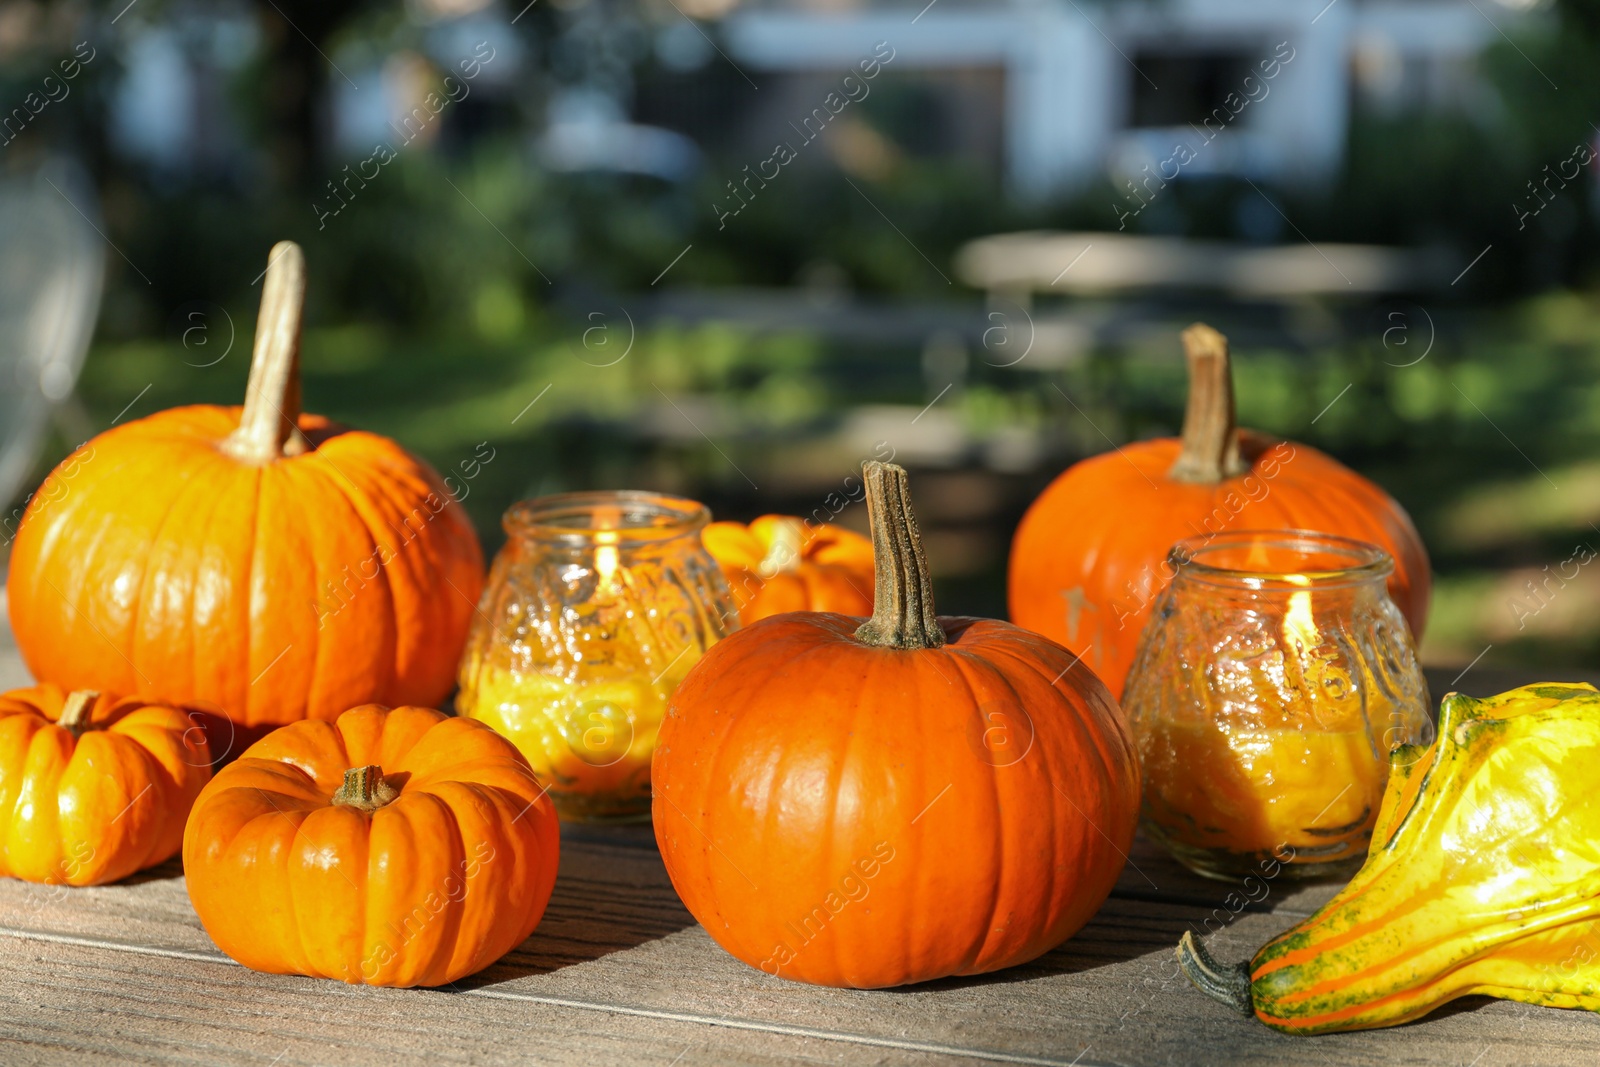 Photo of Many whole ripe pumpkins and candles on wooden table outdoors